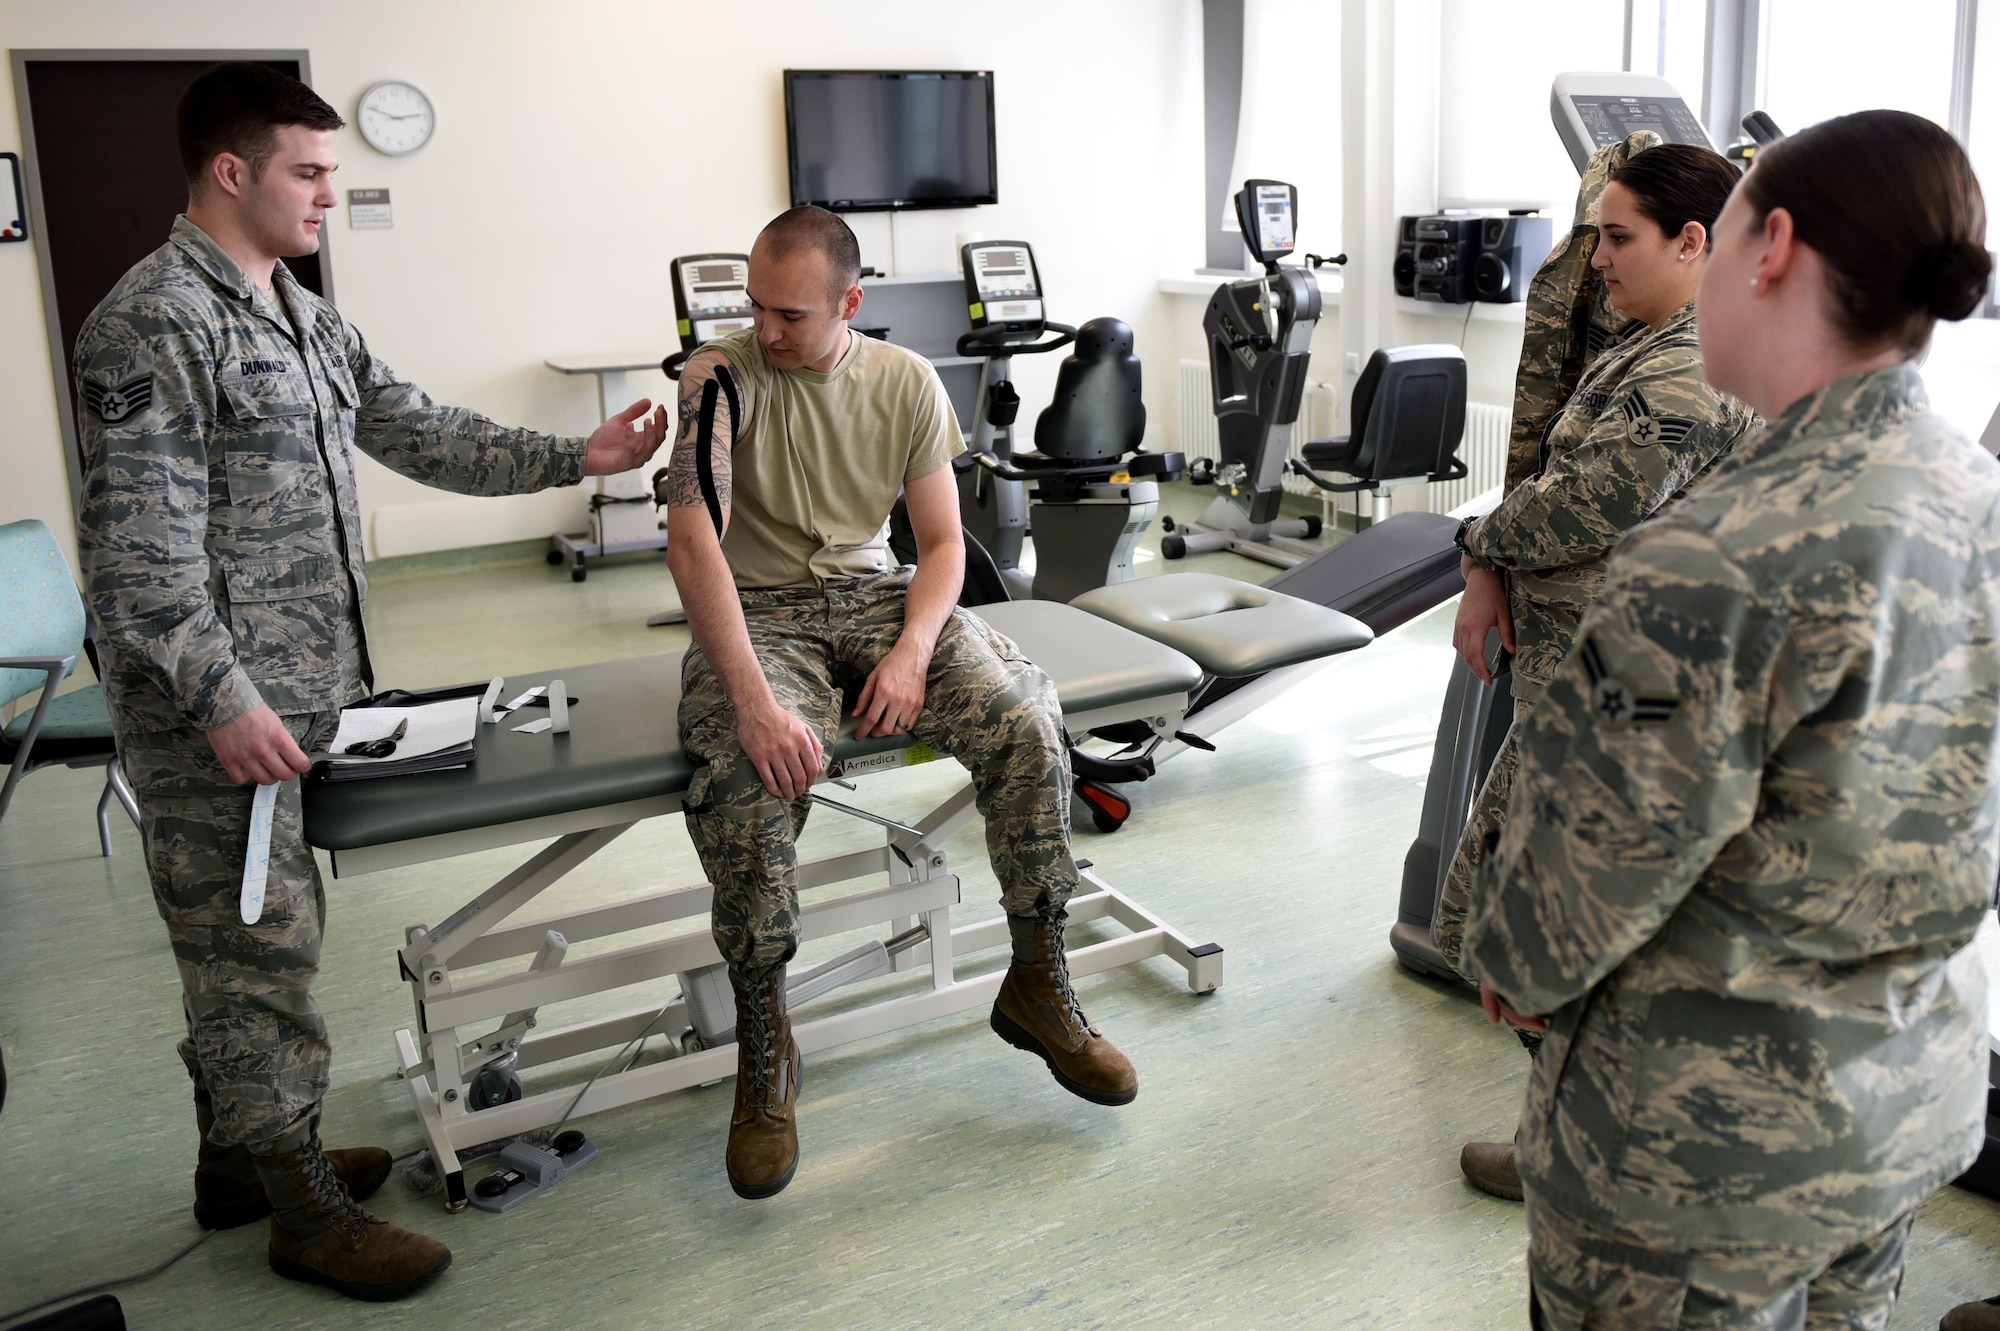 Staff Sgt. Daniel Dunwald, 52nd Medical Operations Squadron physical therapy technician and certified kinesio tape practitioner, teaches others the benefits of using k-tape during the recent medical group training day at Spangdahlem Air Base, Germany, April 21, 2017. Kinesio taping is a procedure intended to decrease pain and inflammation, stimulate blood and lymph circulation, aid postural correction, enhance athletic performance and
prevent musculoskeletal injuries. (U.S. Air Force photo by Tech. Sgt. Staci Miller)